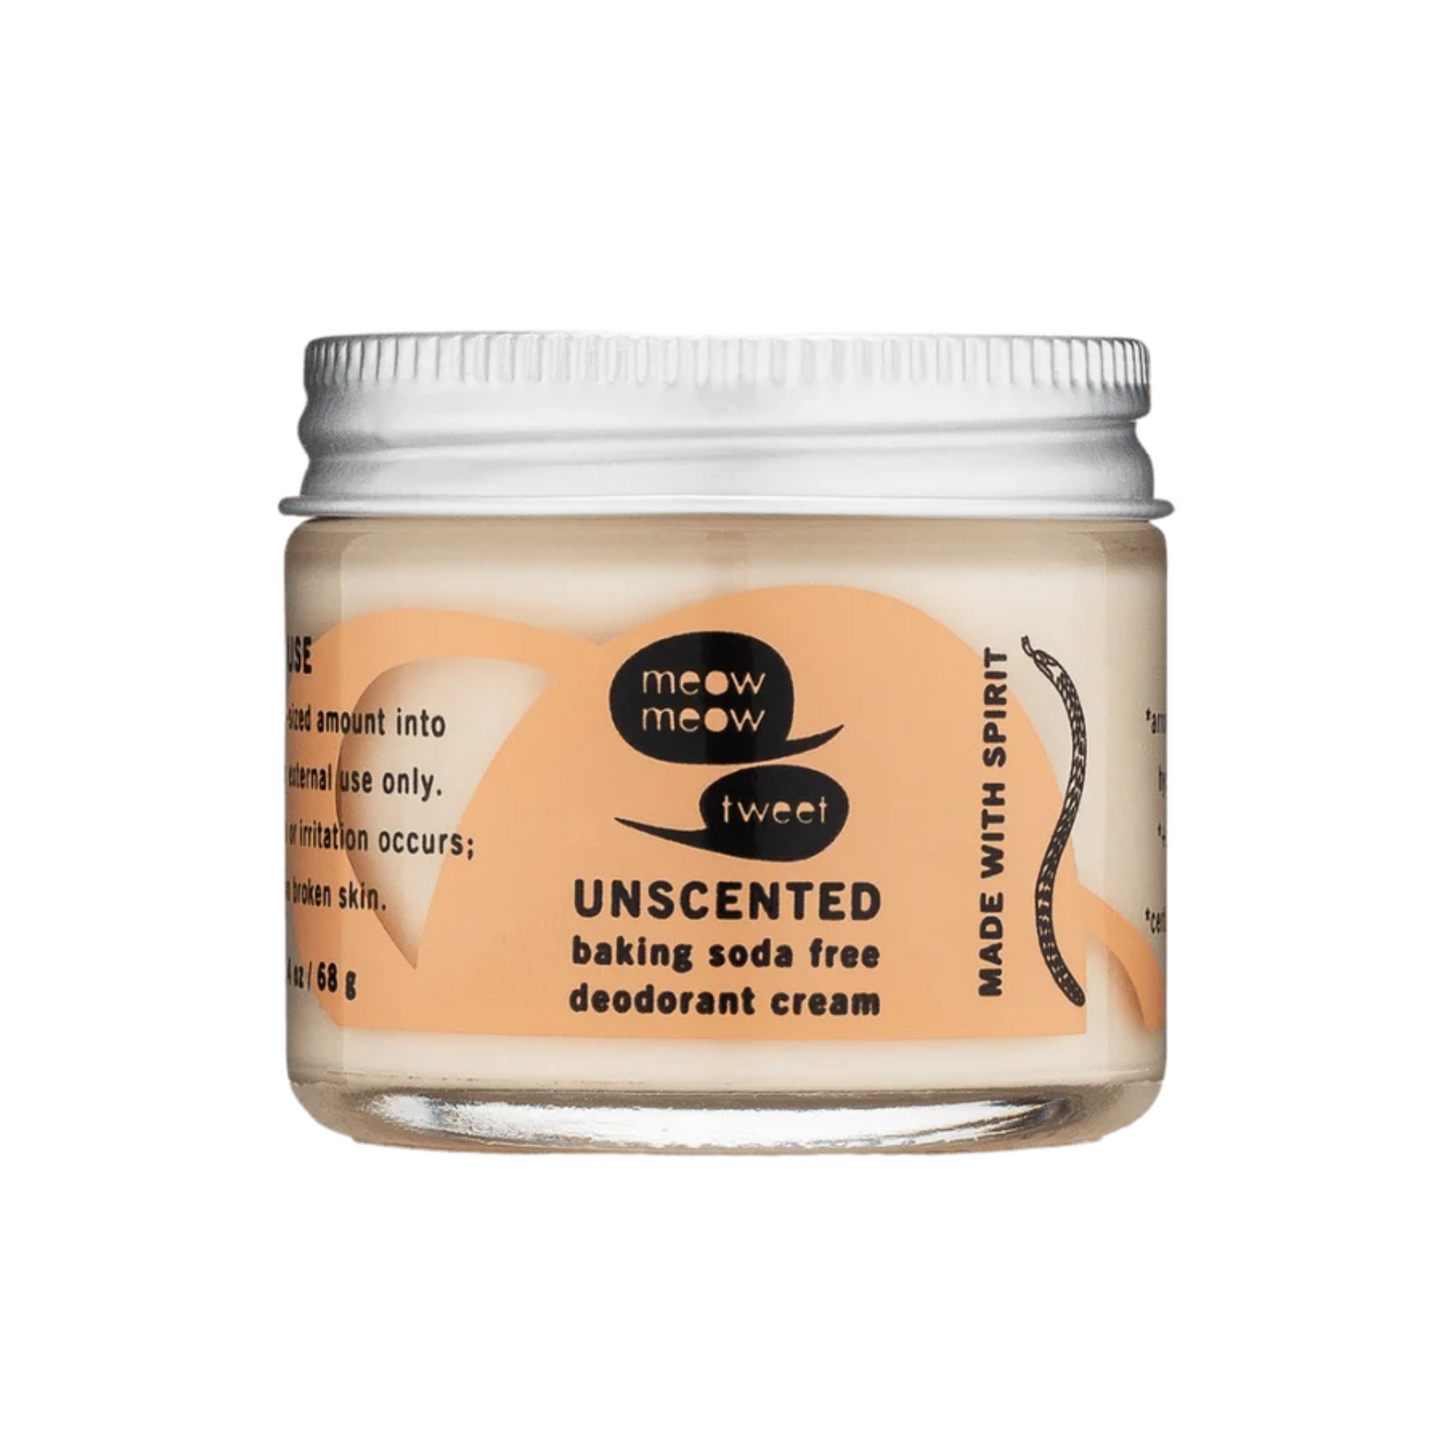 Primary Image of Unscented Baking Soda Free Deo Cream